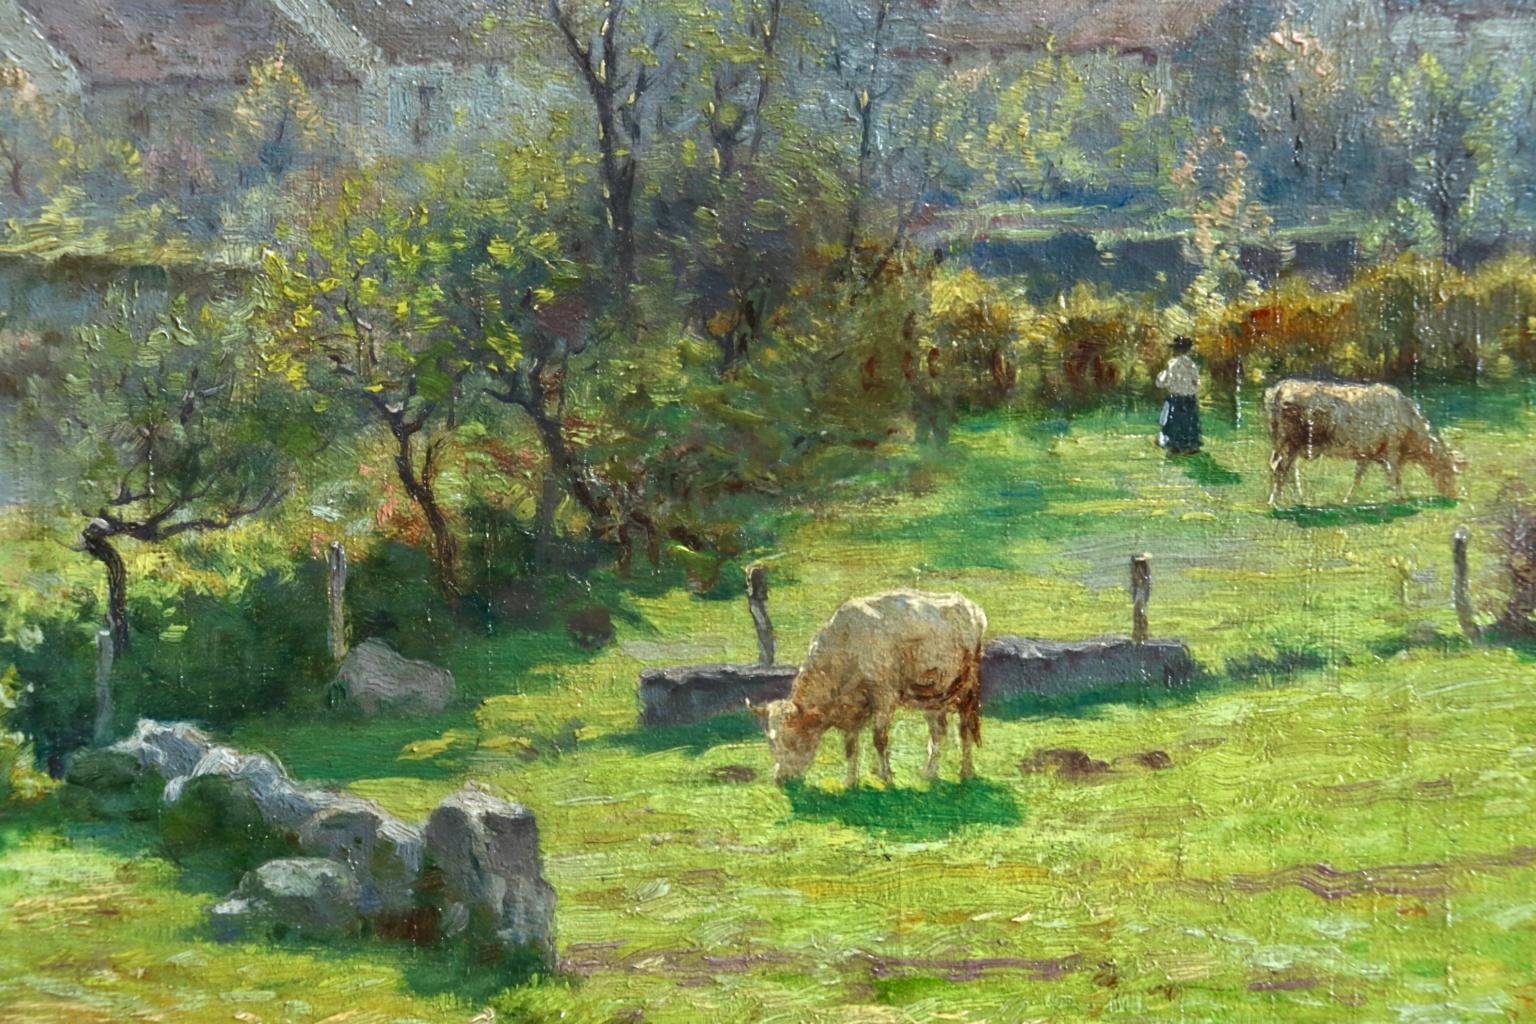 A Summer's Day - Impressionist Oil, Cattle by River in Landscape by J Monchablon 1